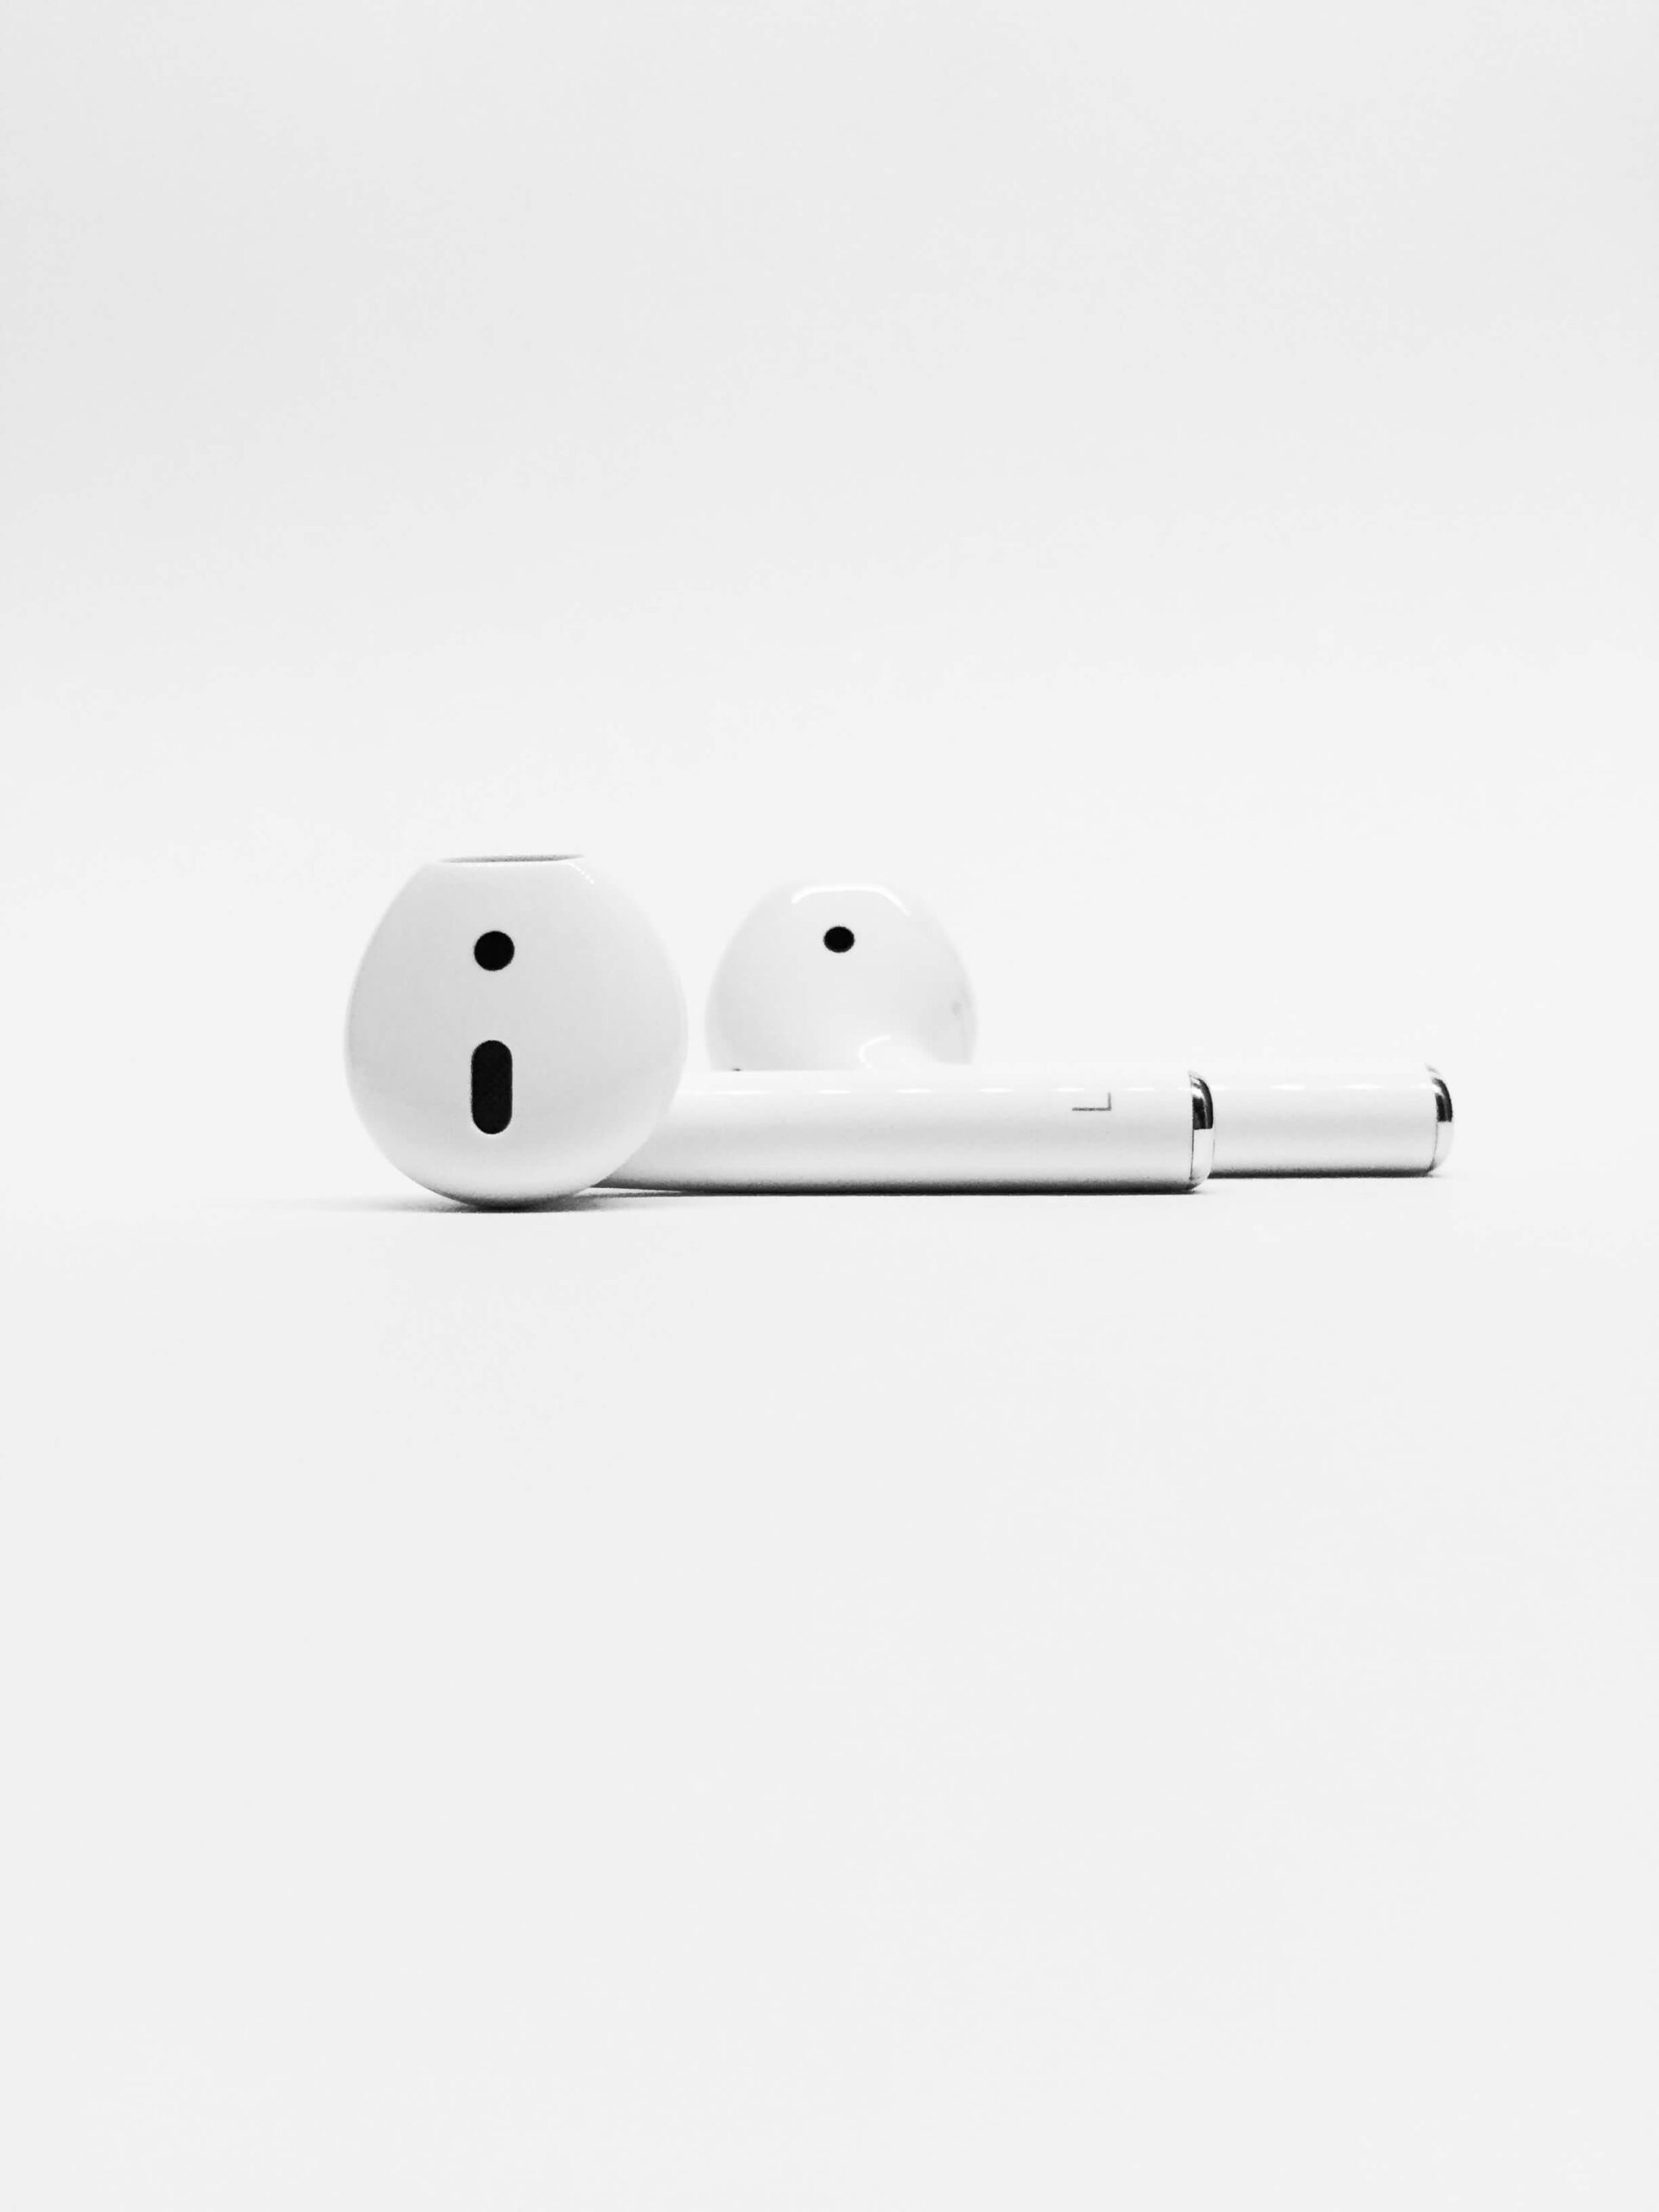 Apple’s music player shaped the future audio